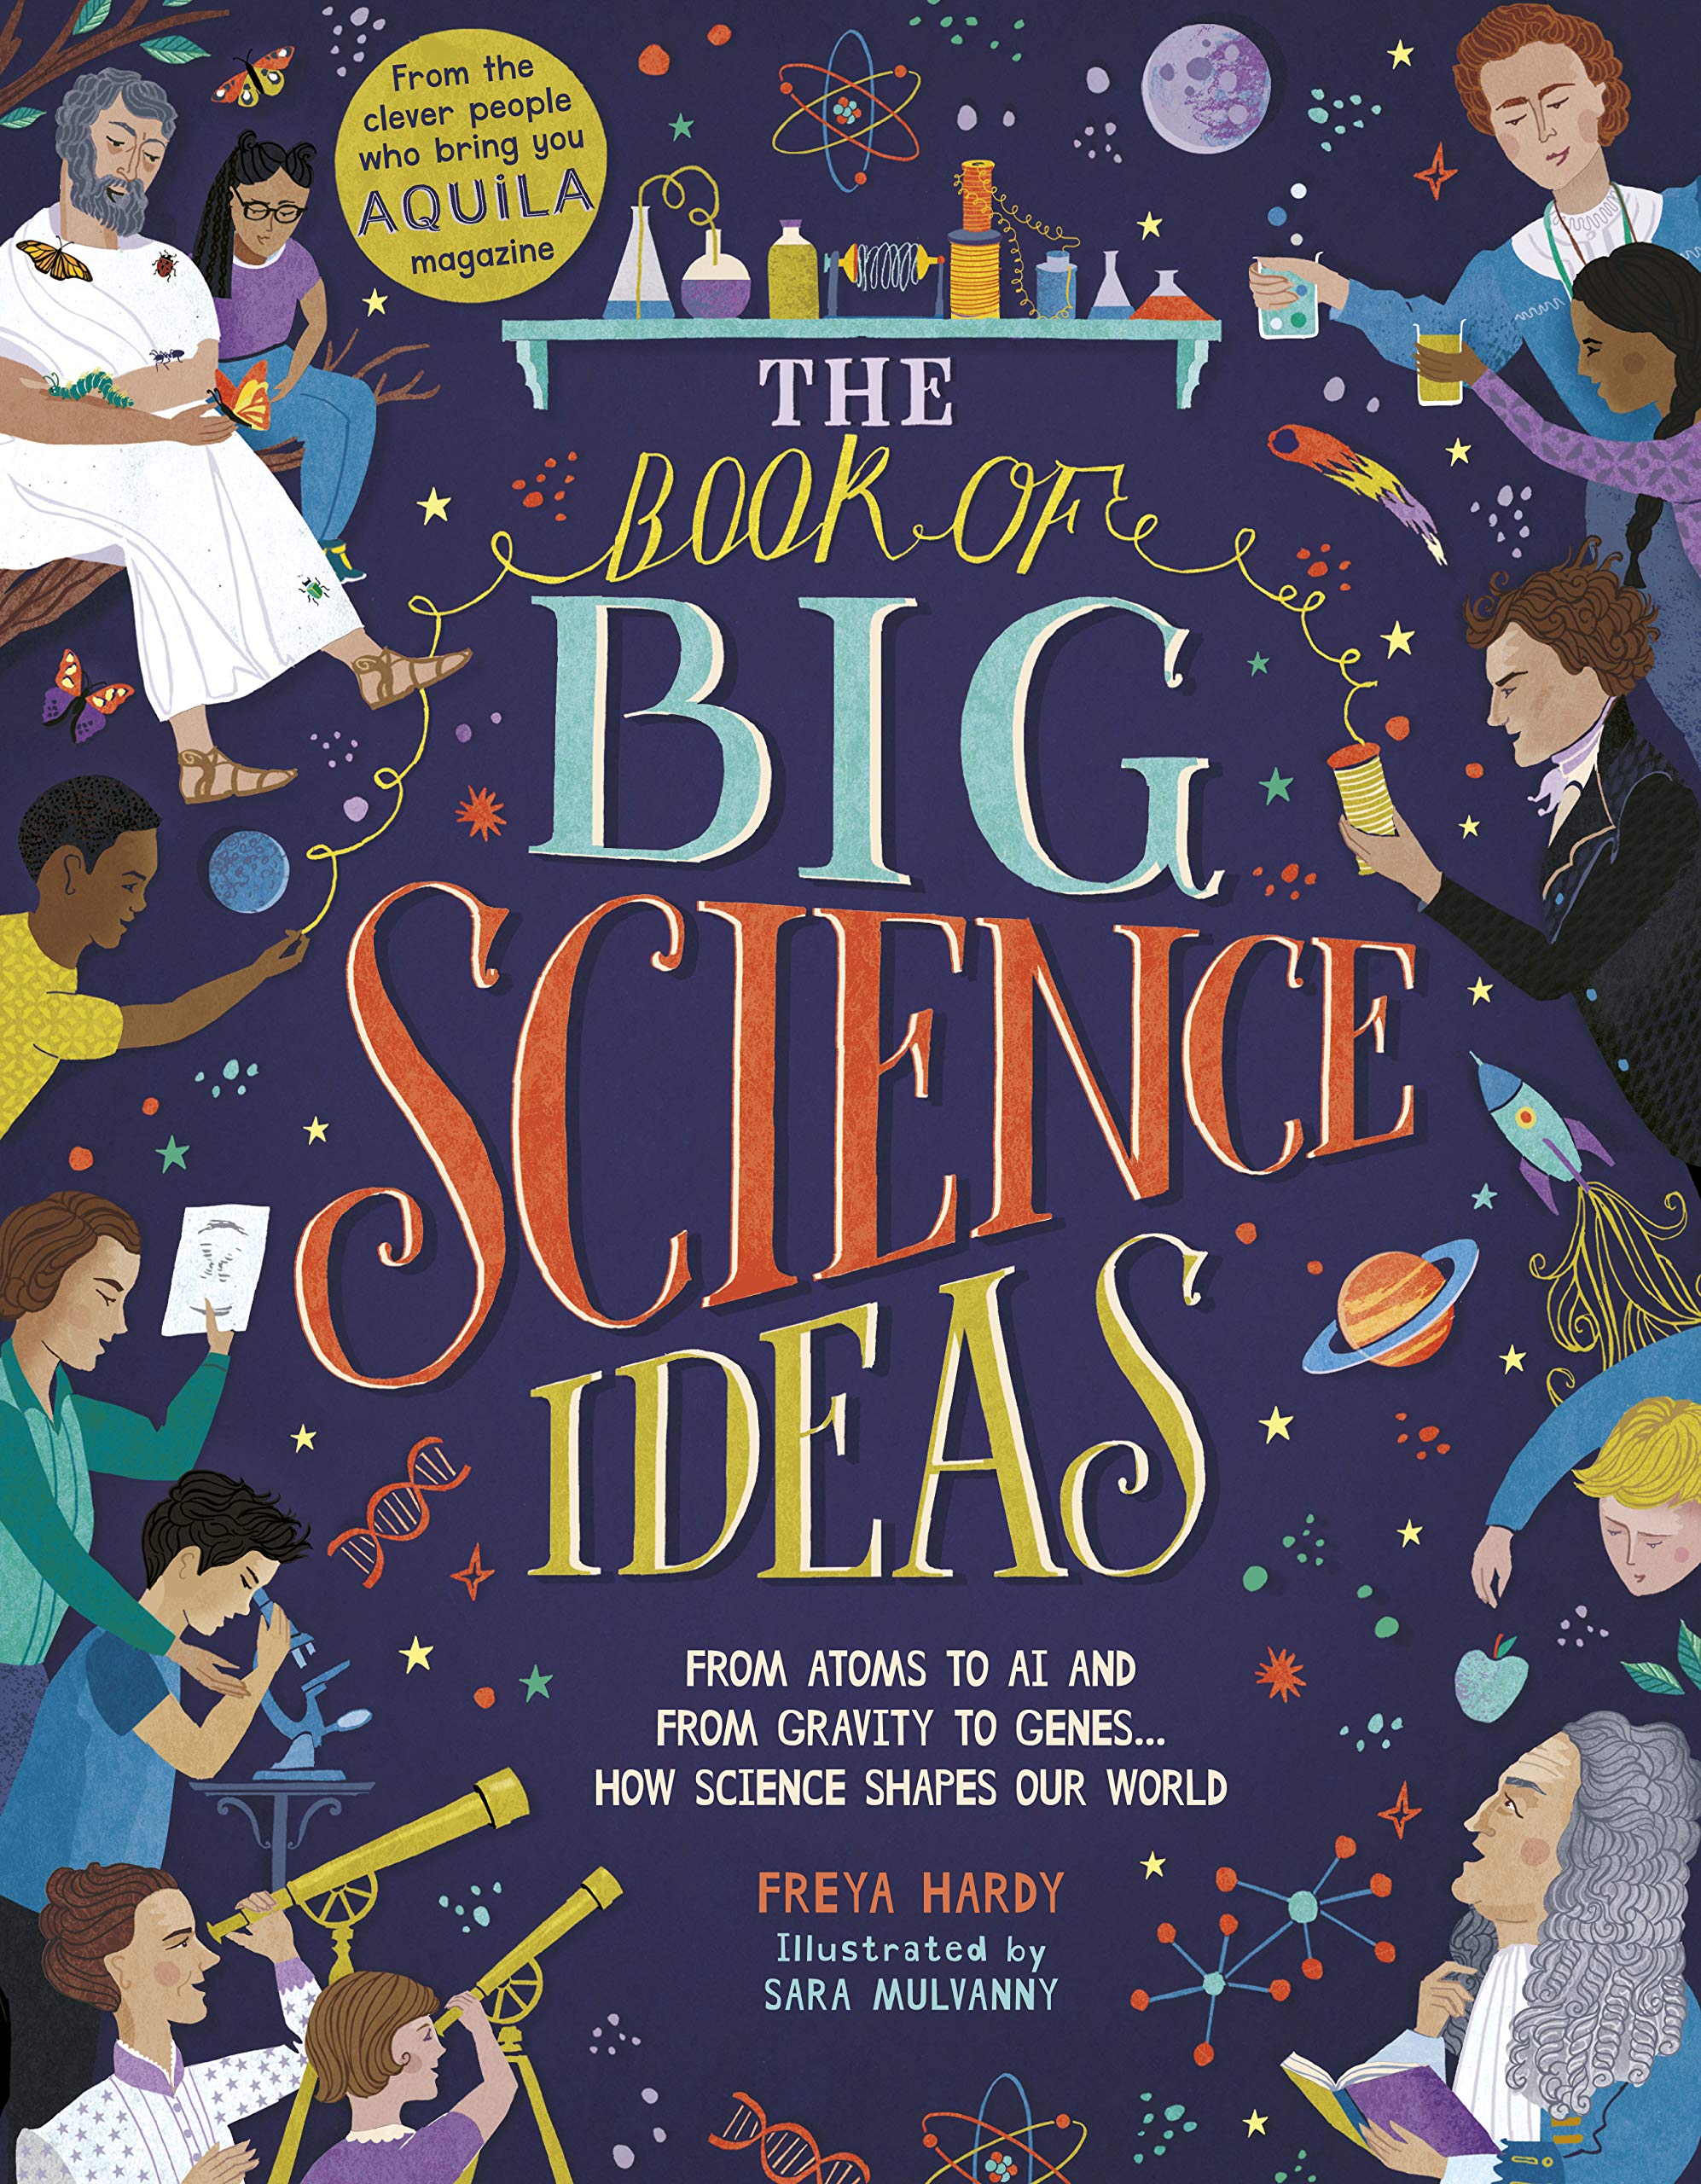 The Book of Big Science Ideas